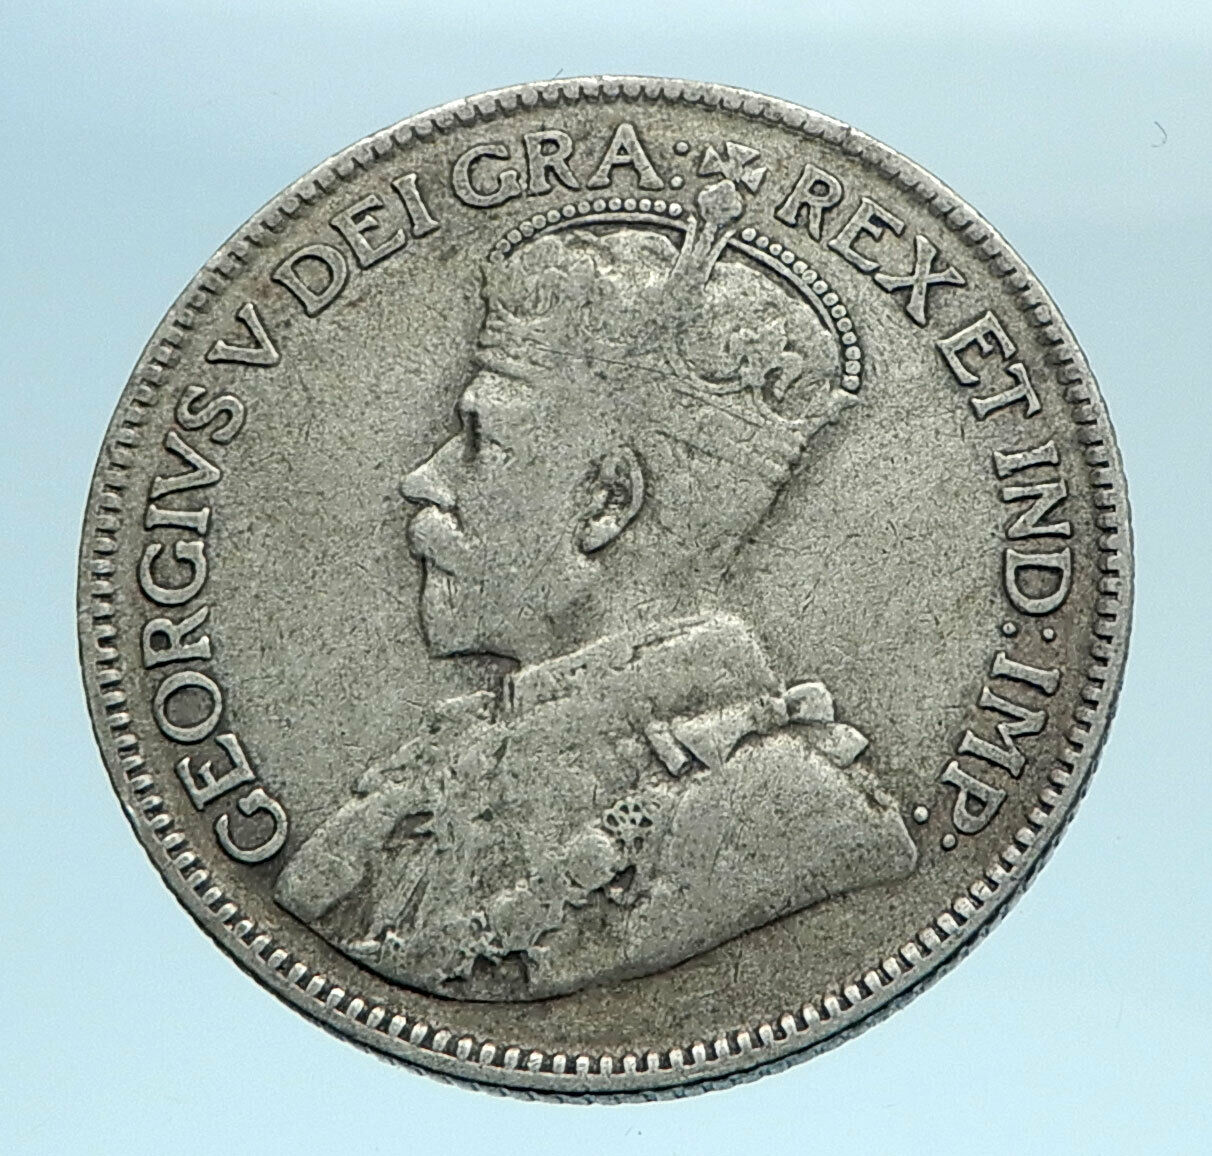 1928 CANADA UK King George V Genuine Antique Old SILVER 25 CENTS Coin i77735